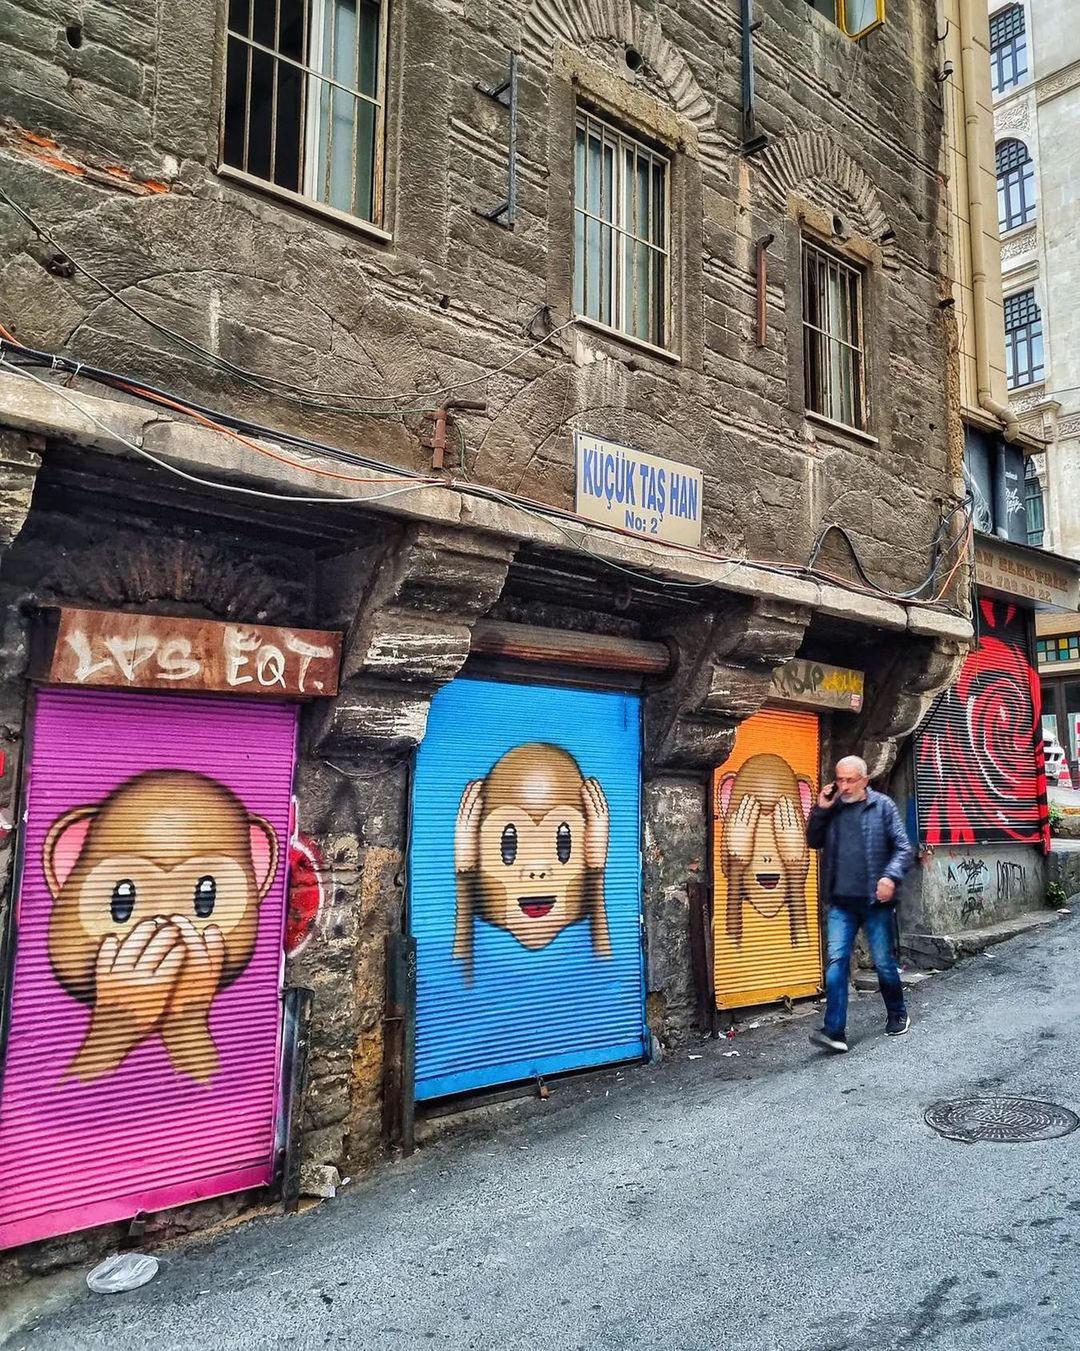 #istanbul - Who would like to have a Sunday tour in the backstreets of Istanbul